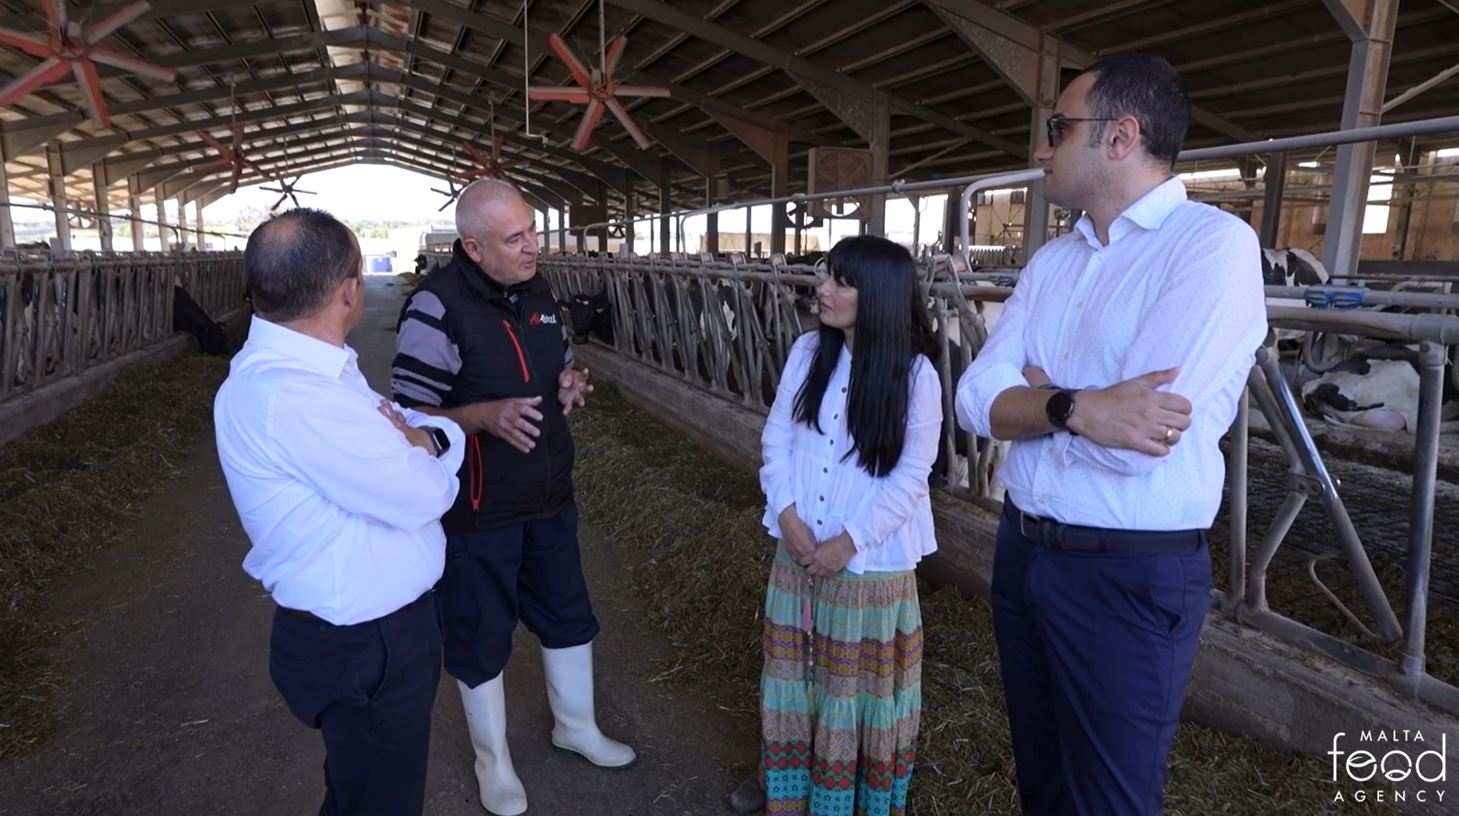 visit farmers who explained to us about their work related to milk production.